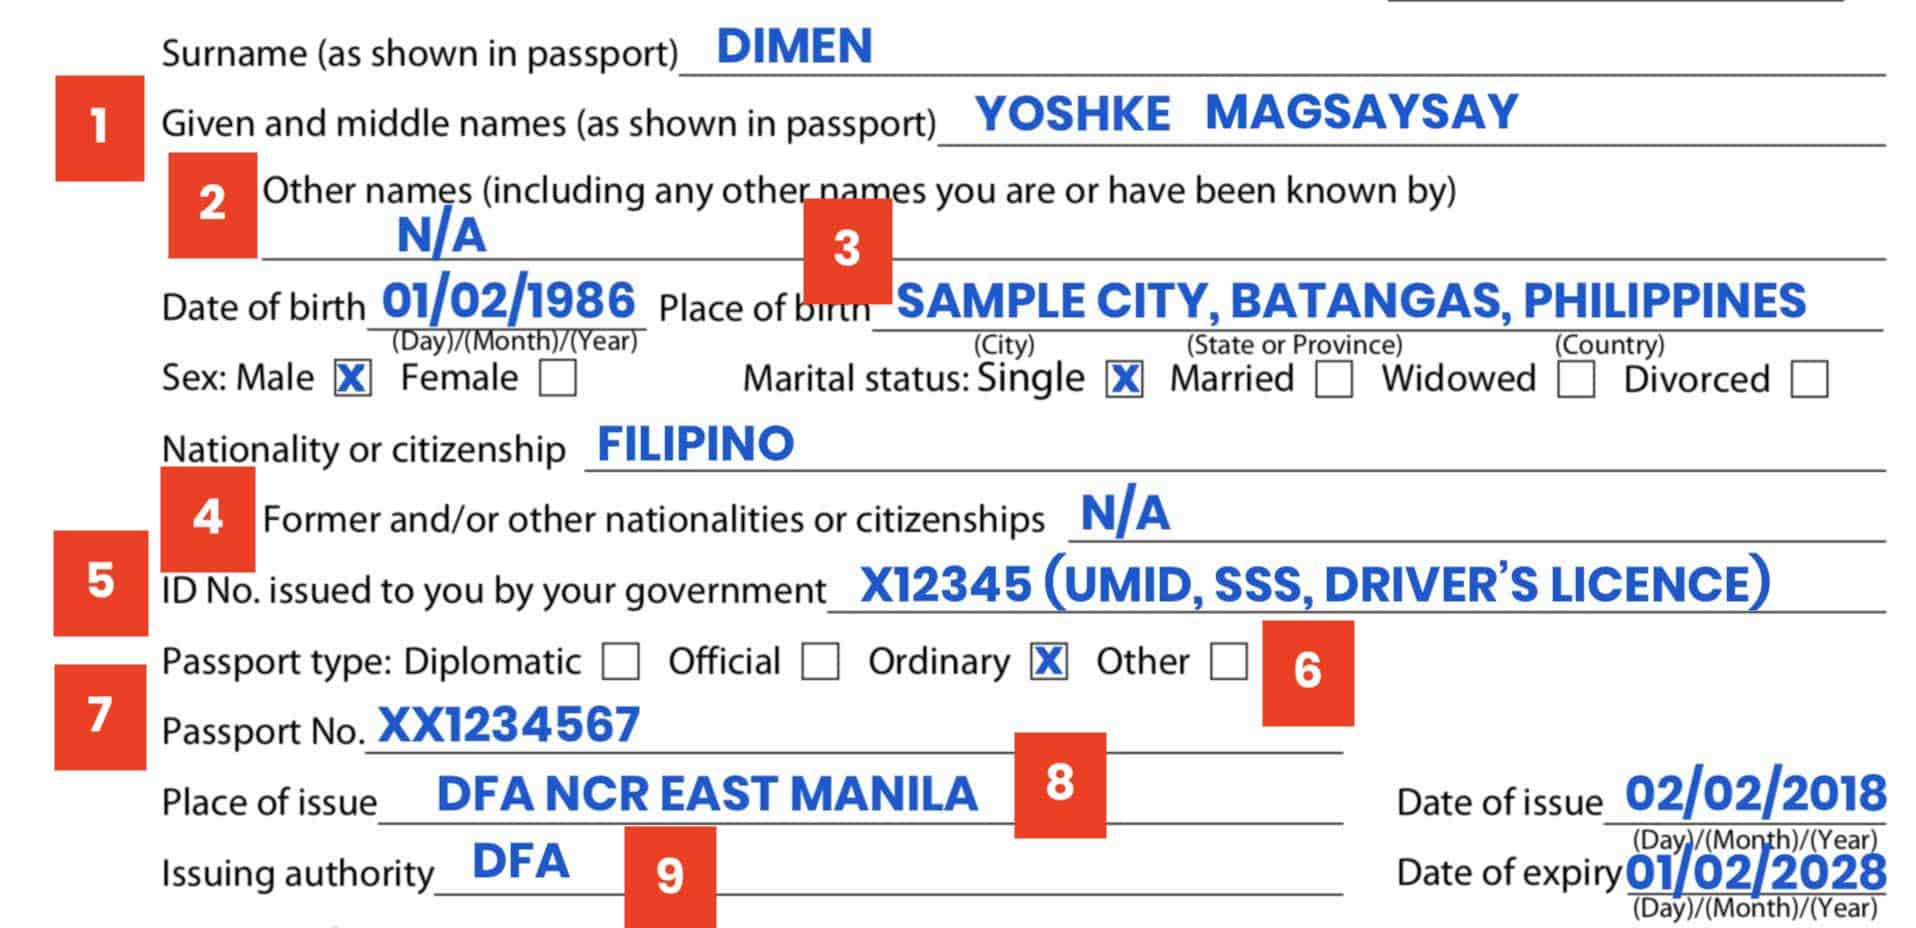 JAPAN VISA APPLICATION FORM: Sample + How to Fill it Out | The Poor